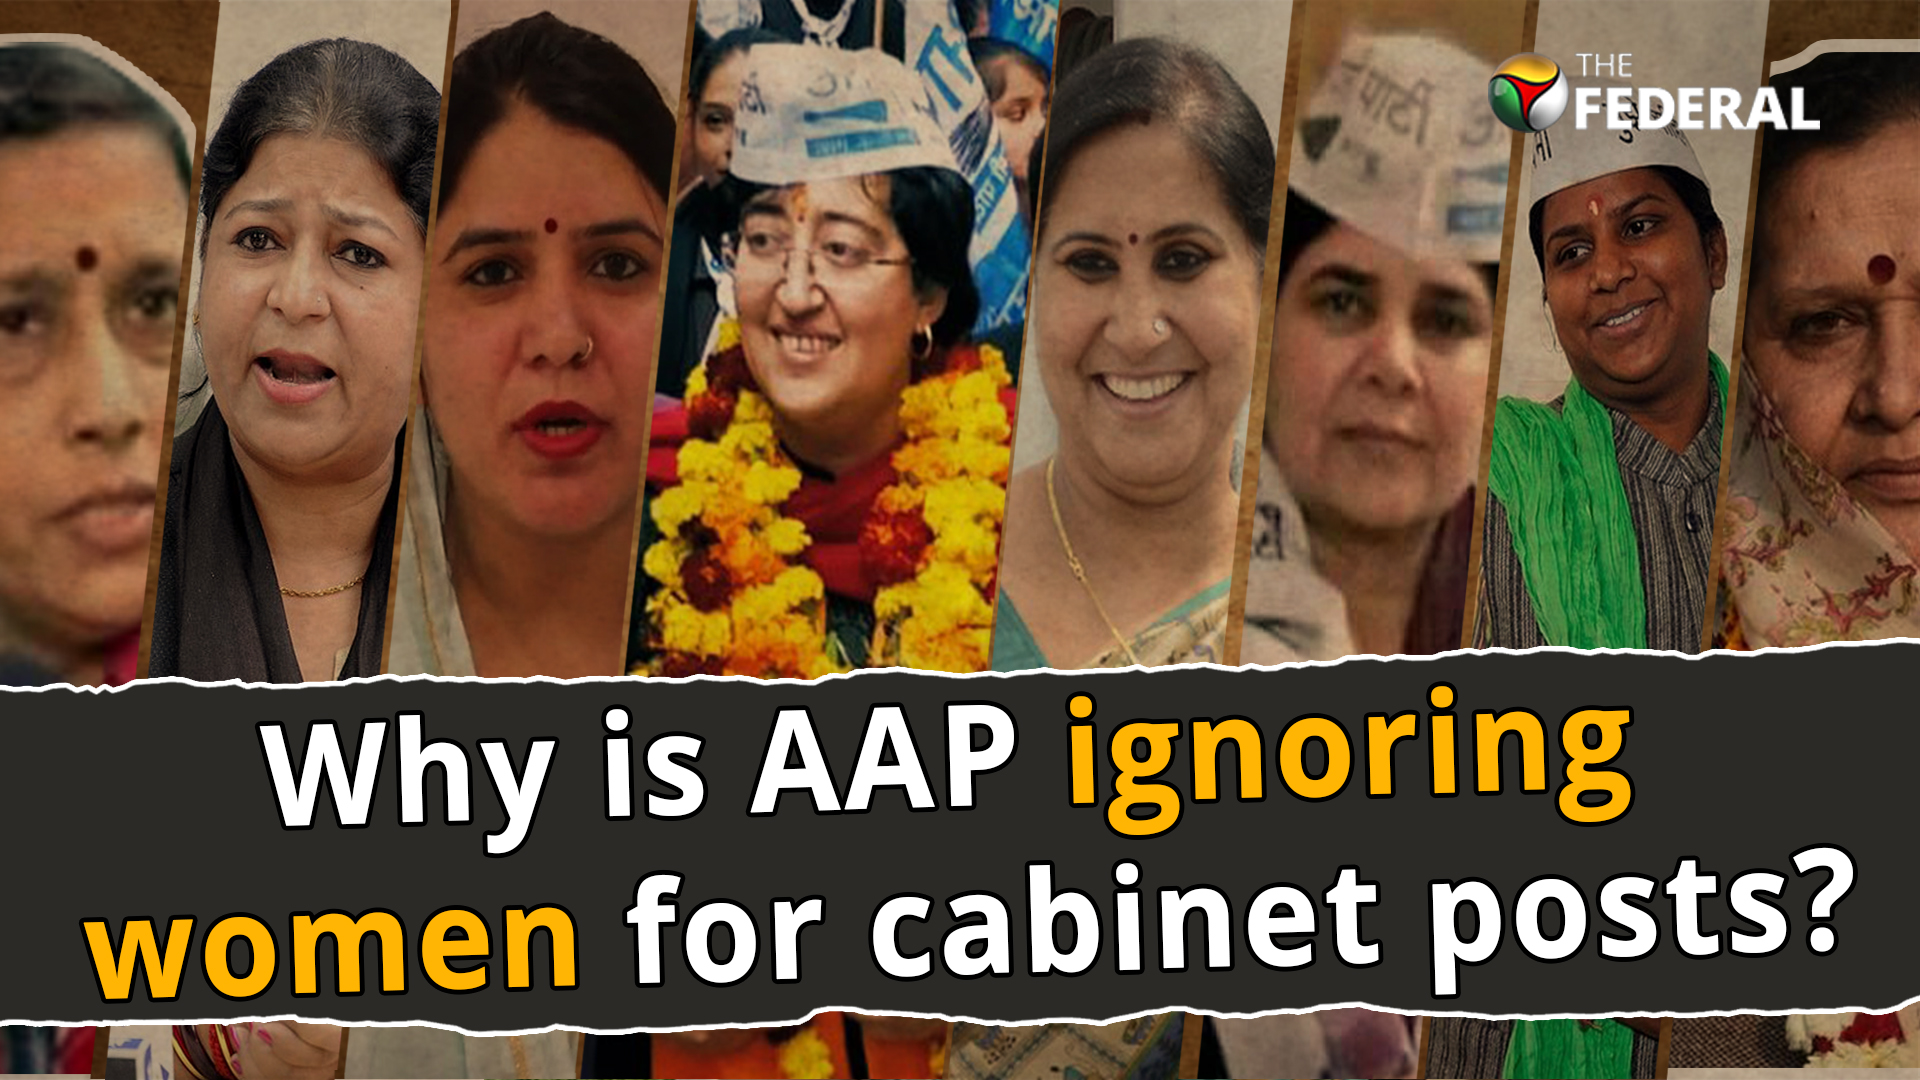 Why is AAP ignoring women for cabinet posts?